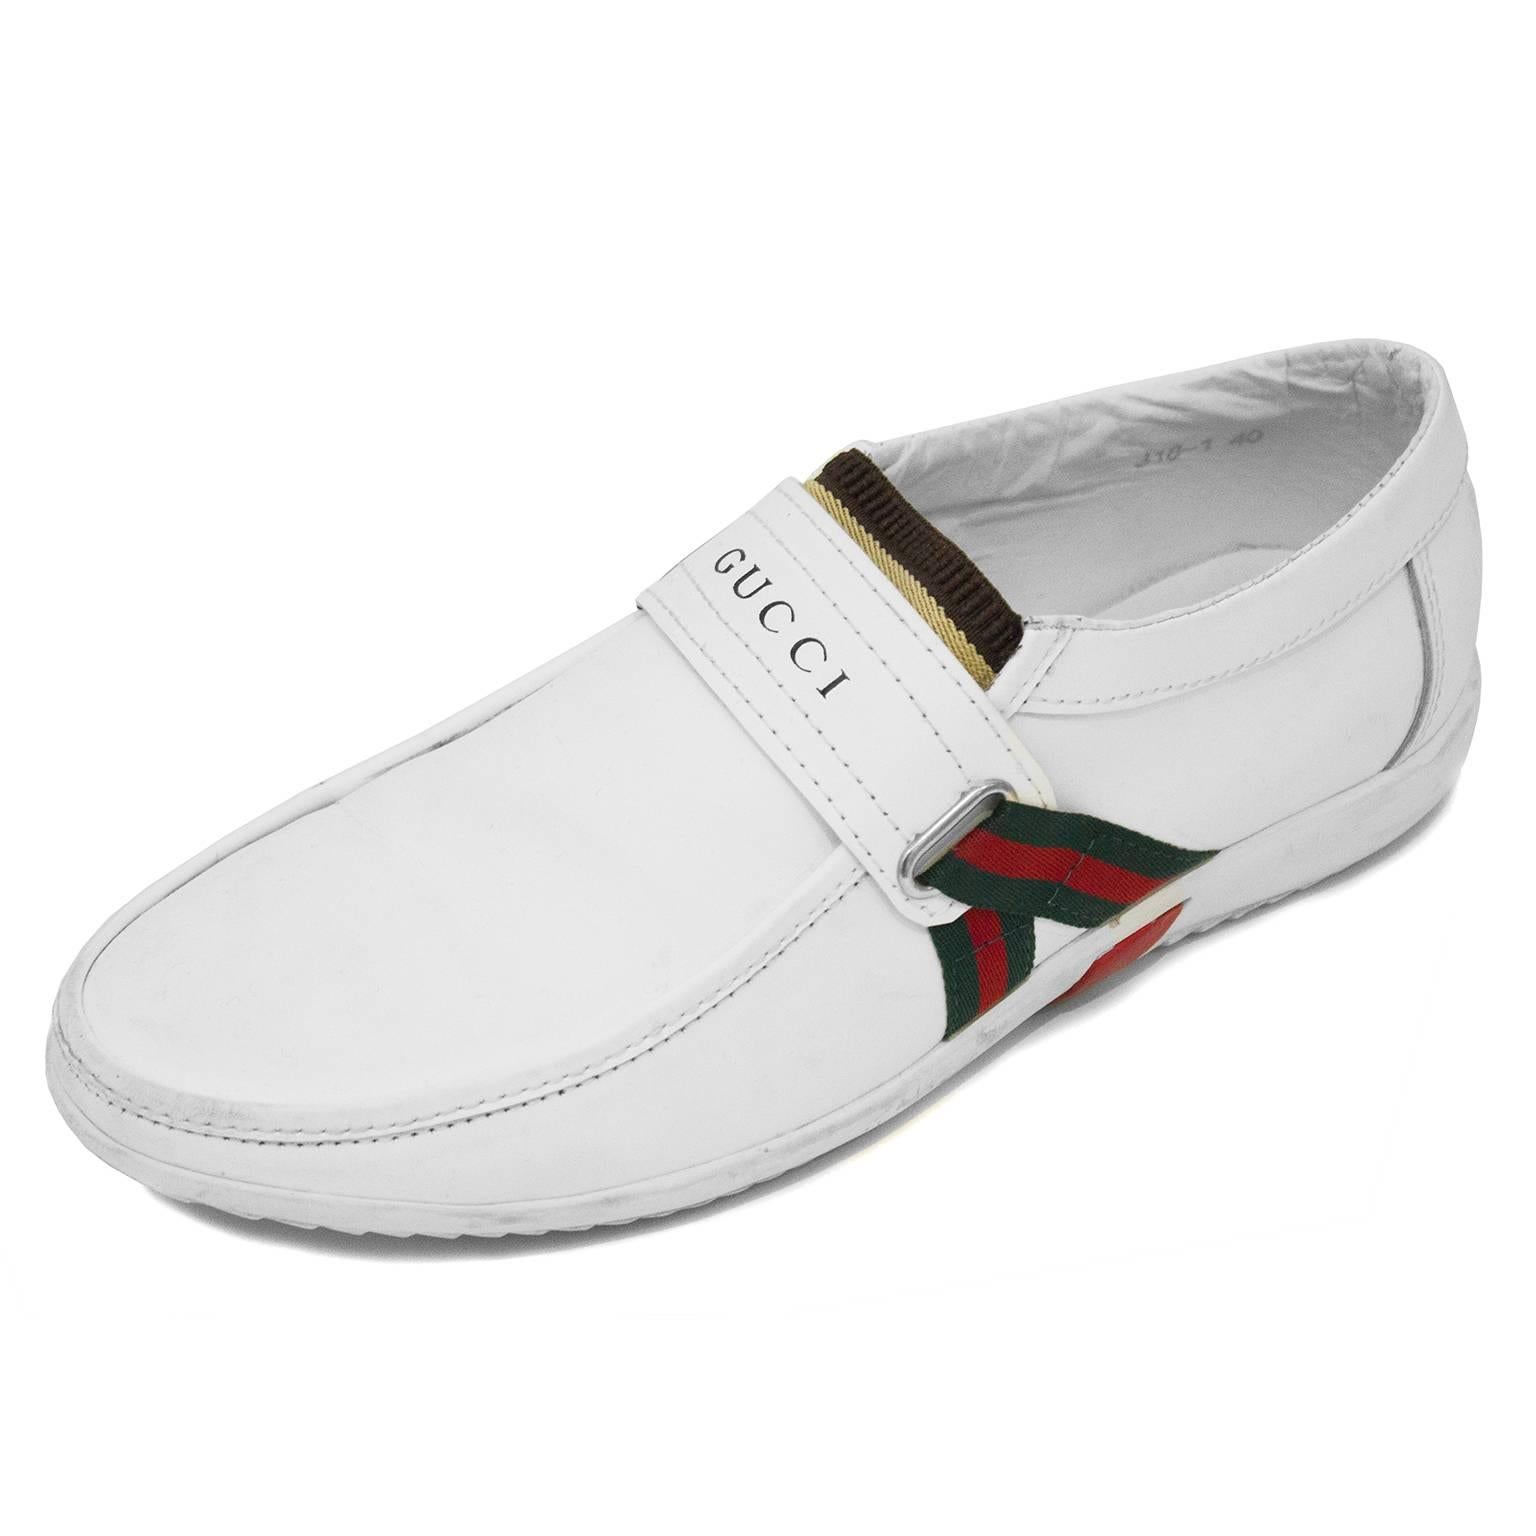 Gucci 1970's small fitting mans runner in white leather with white rubber sole. Unique red and green ribbon detail on the sides with a stretchy band on this loafer style slip on. Size is Italian men's 7. Will fit a US ladies 9. Very comfortable, not